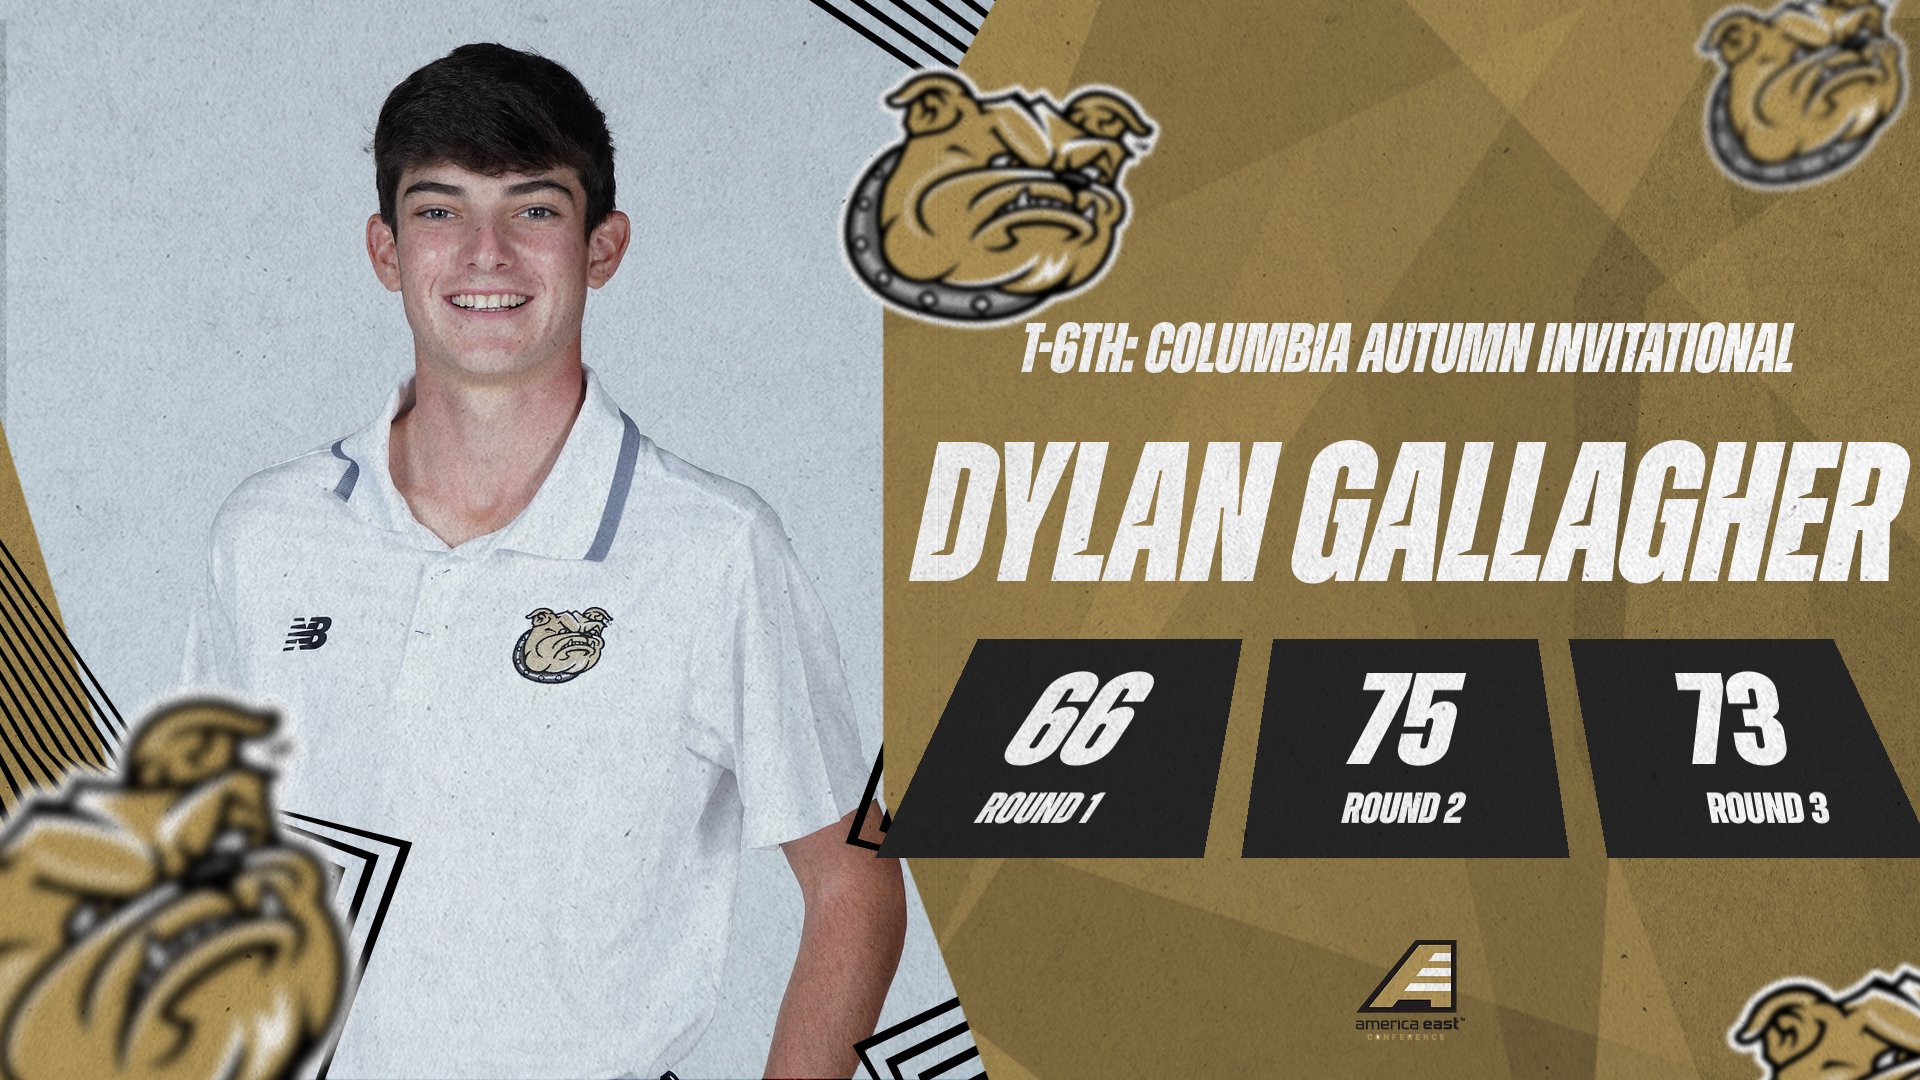 Gallagher shines in Bulldogs Top 3 finish at Columbia Invitational